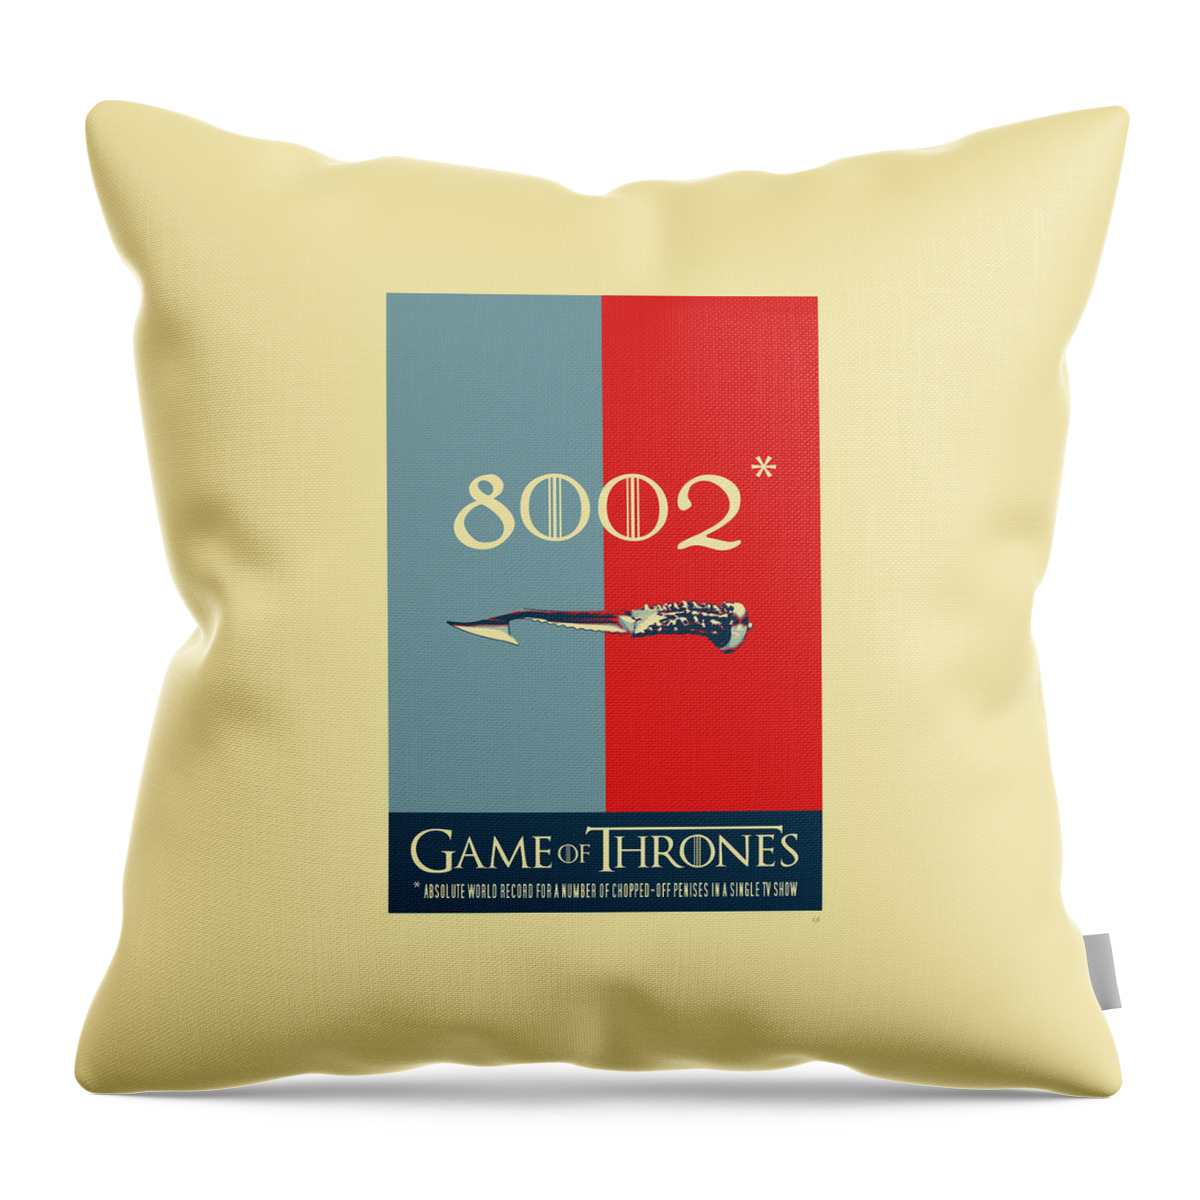 “in Stitches” Collection By Serge Averbukh Throw Pillow featuring the digital art Game of Thrones - 8002 by Serge Averbukh